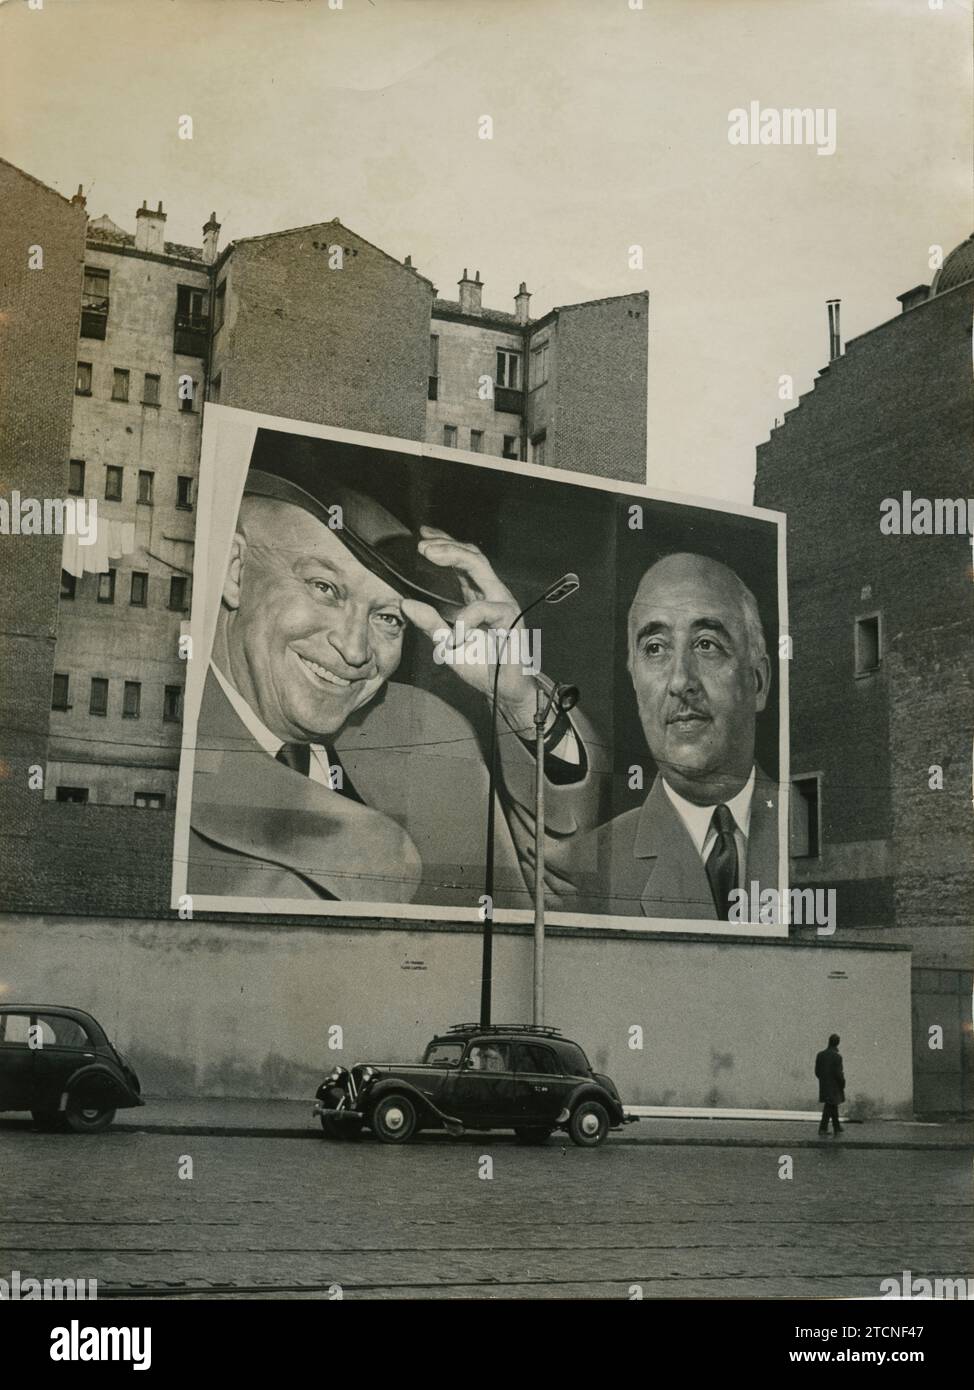 Madrid, December 20, 1959. Preparations for the visit of North American President Dwight D. Eisenhower to Spain, the first by a president of the United States. In the image, one of the enormous posters with the portraits of the North American president and Franco that were placed along the route that both leaders took in the streets of Madrid. Credit: Album / Archivo ABC / Teodoro Naranjo Domínguez Stock Photo